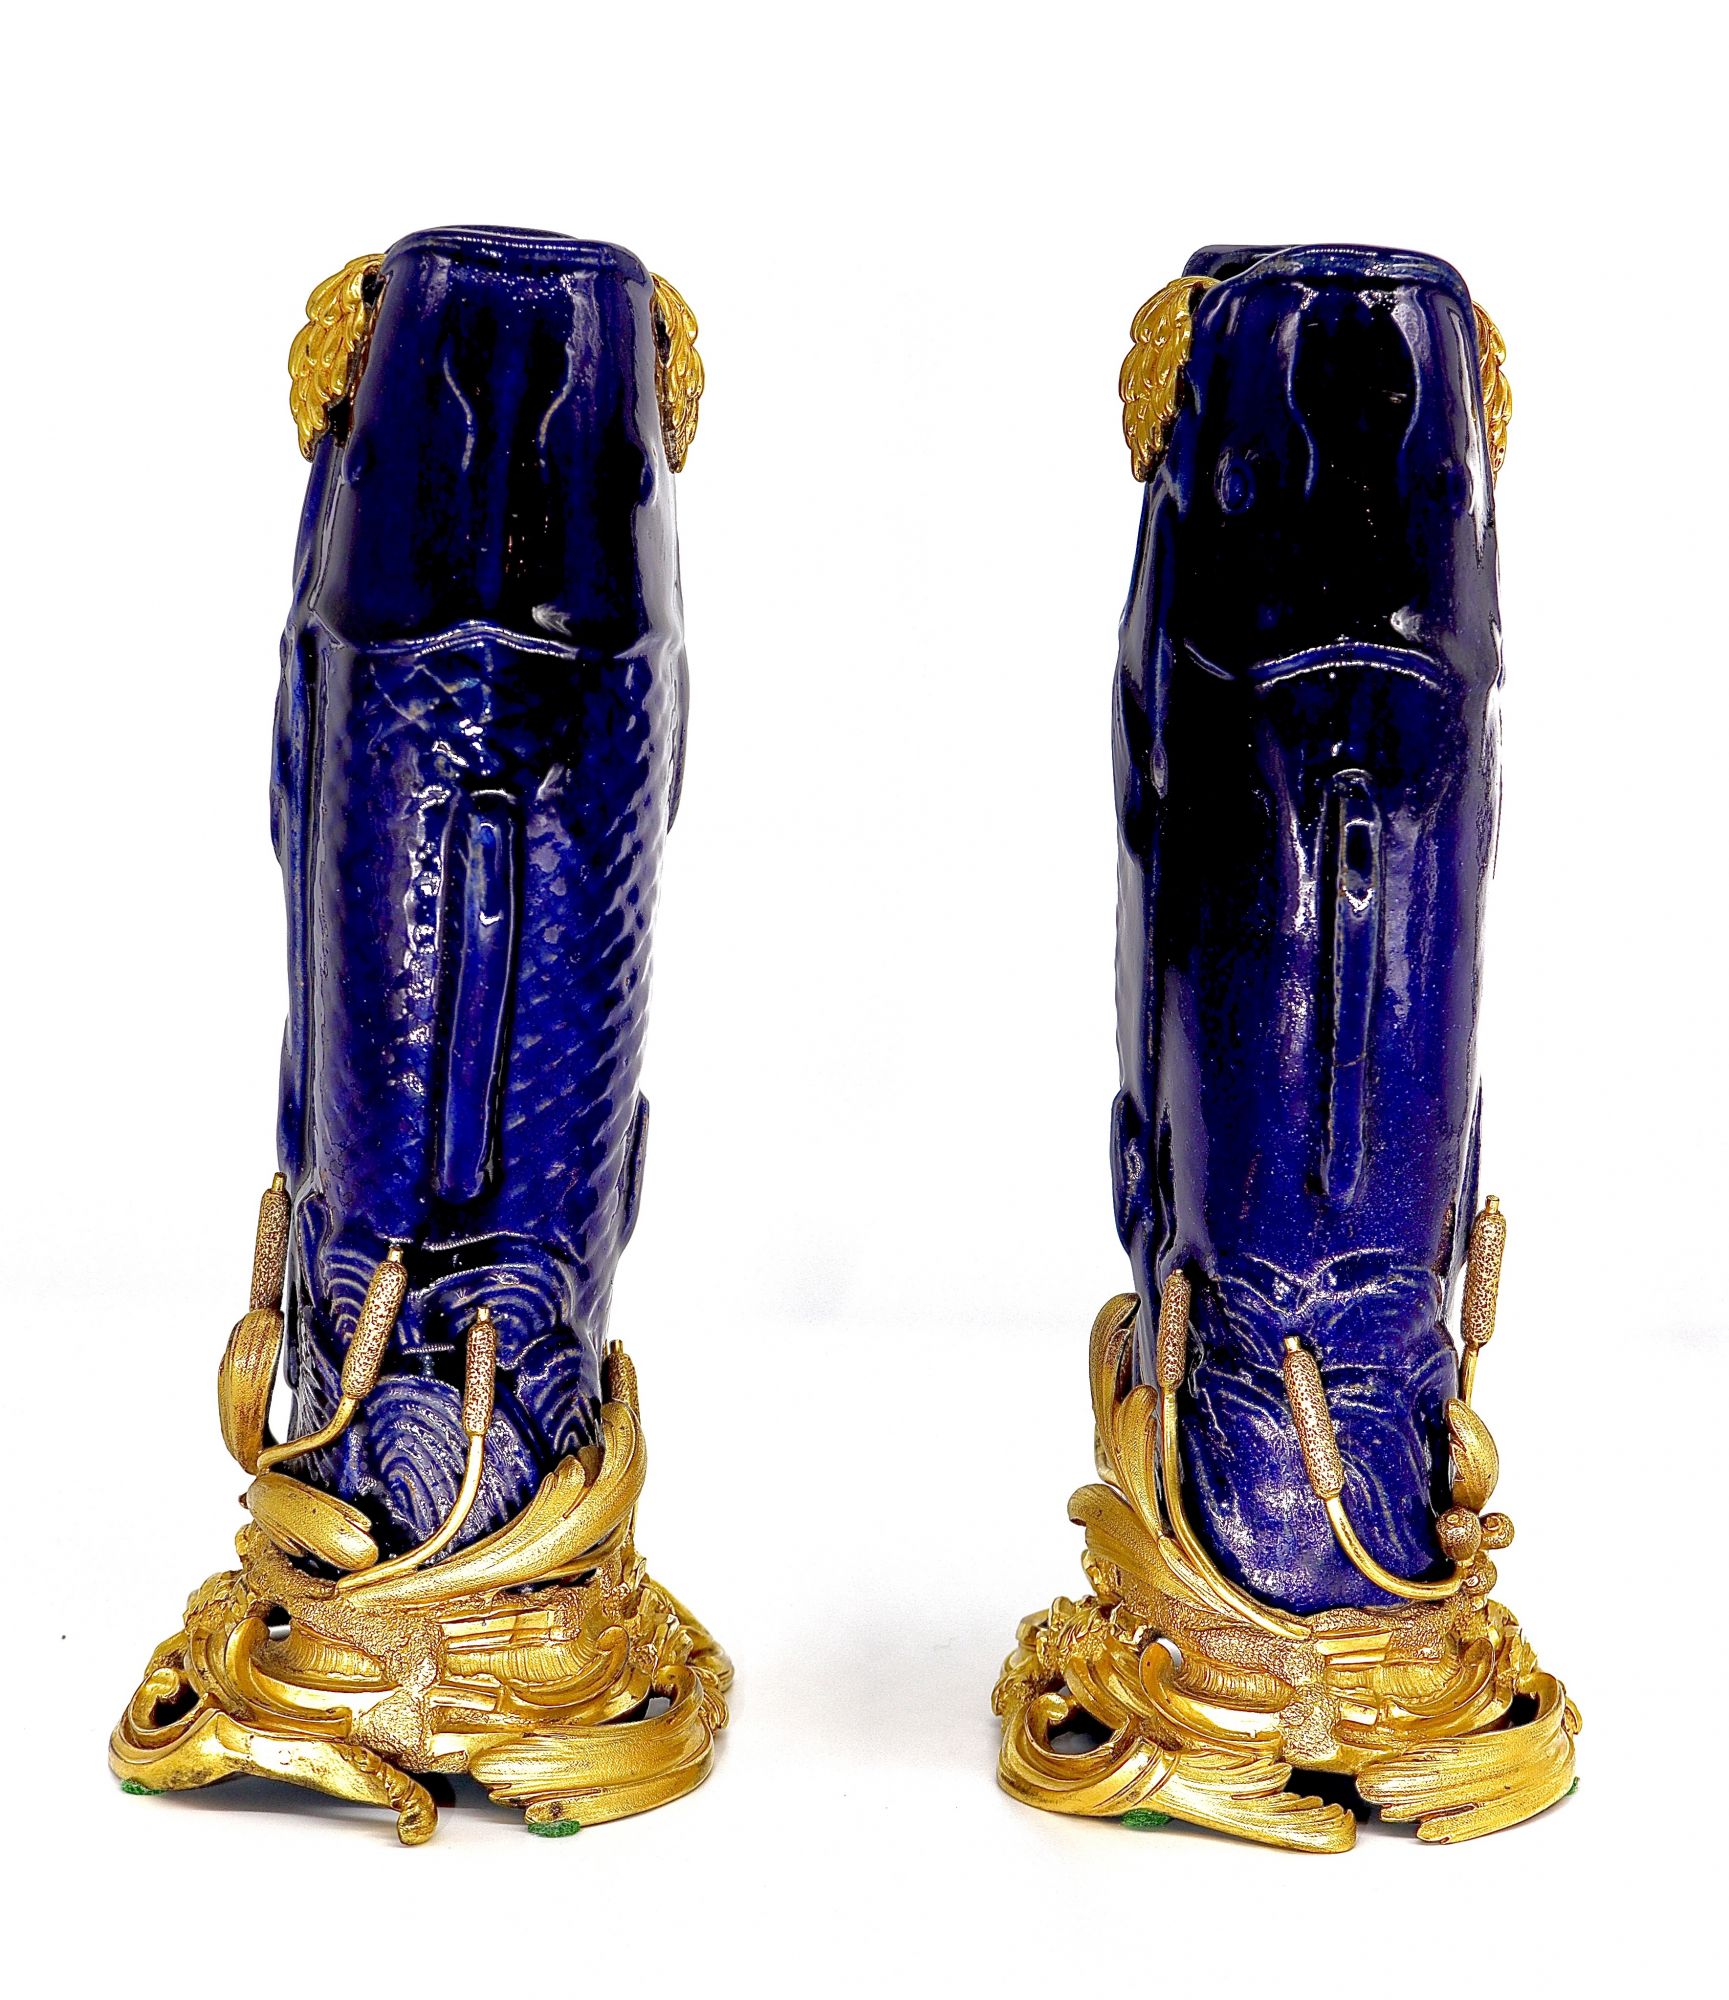 A Louis XV gilt-bronze mounted Chinese blue porcelain vase, the